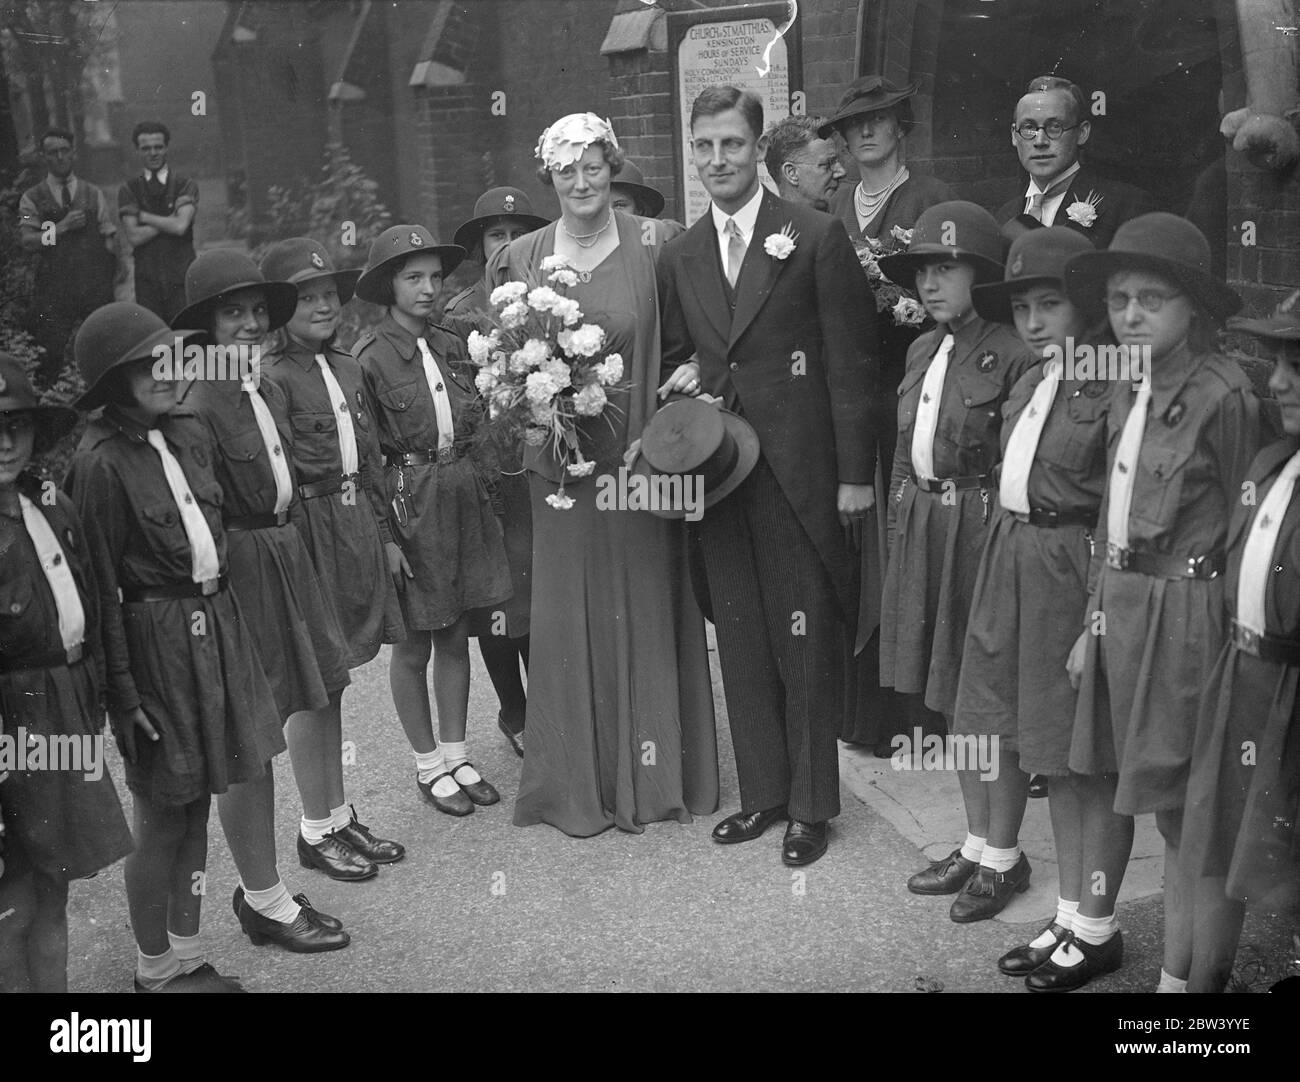 Early morning wedding at London church . Brides girl guides formed guard of honour . The key unusually early hour was chosen for the wedding at St Matthias Church , Earl's Court , of Mr R A Skelton , a British museum official , and Miss M K Macleod . A guard of honour was provided by the 11 Holborn Girl Guides of who the bride is captain . Photo shows , the bride and groom leaving the church through the guard of honour of Girl Guides . 24 September 1936 Stock Photo